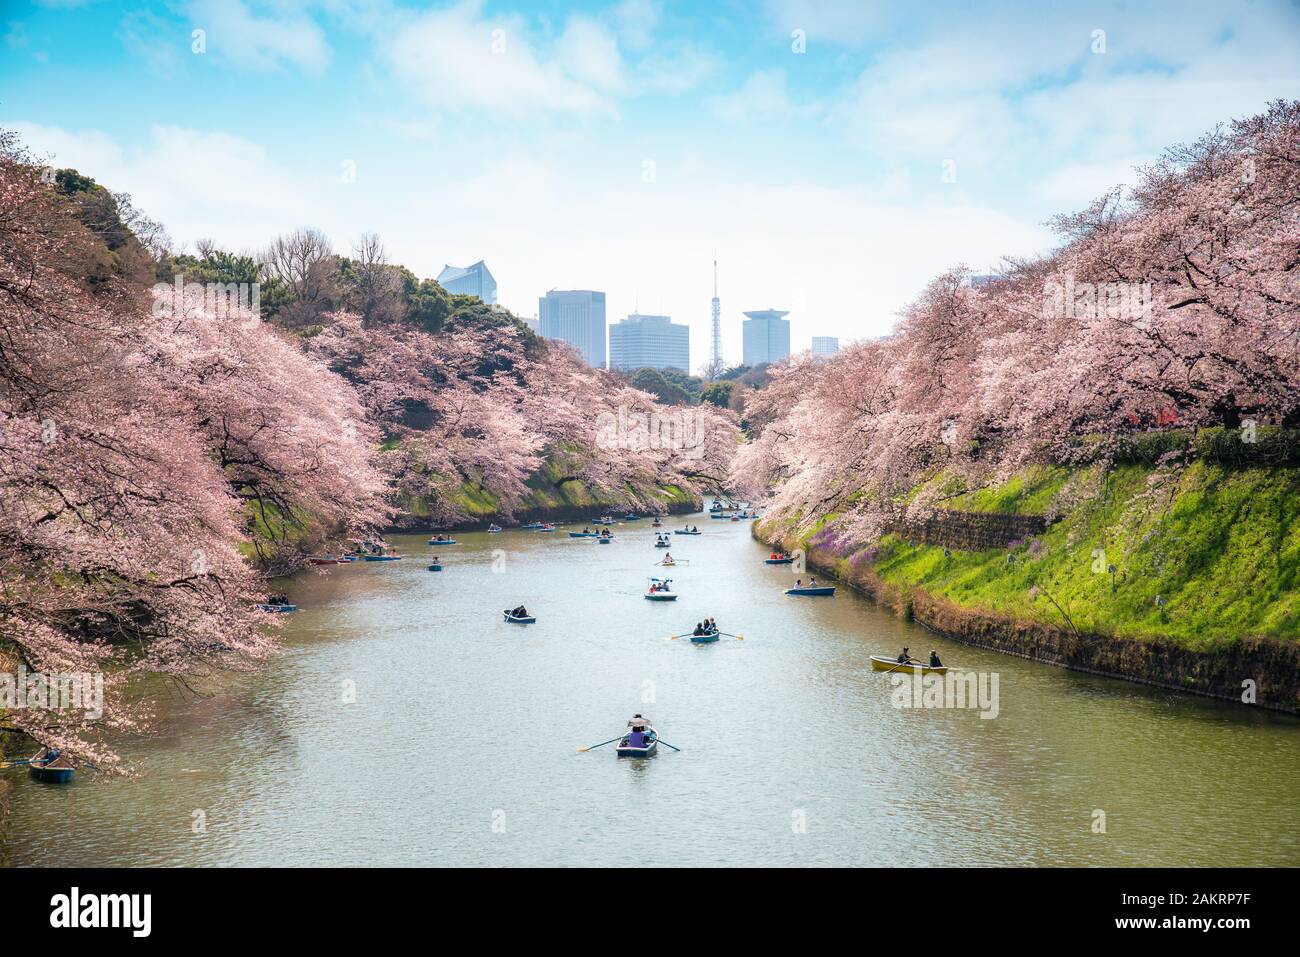 View of massive cherry blossom tree with poeple oar kayak boat in Tokyo, Japan as background. Photoed at Chidorigafuchi, Tokyo, Japan. Landscape and n Stock Photo